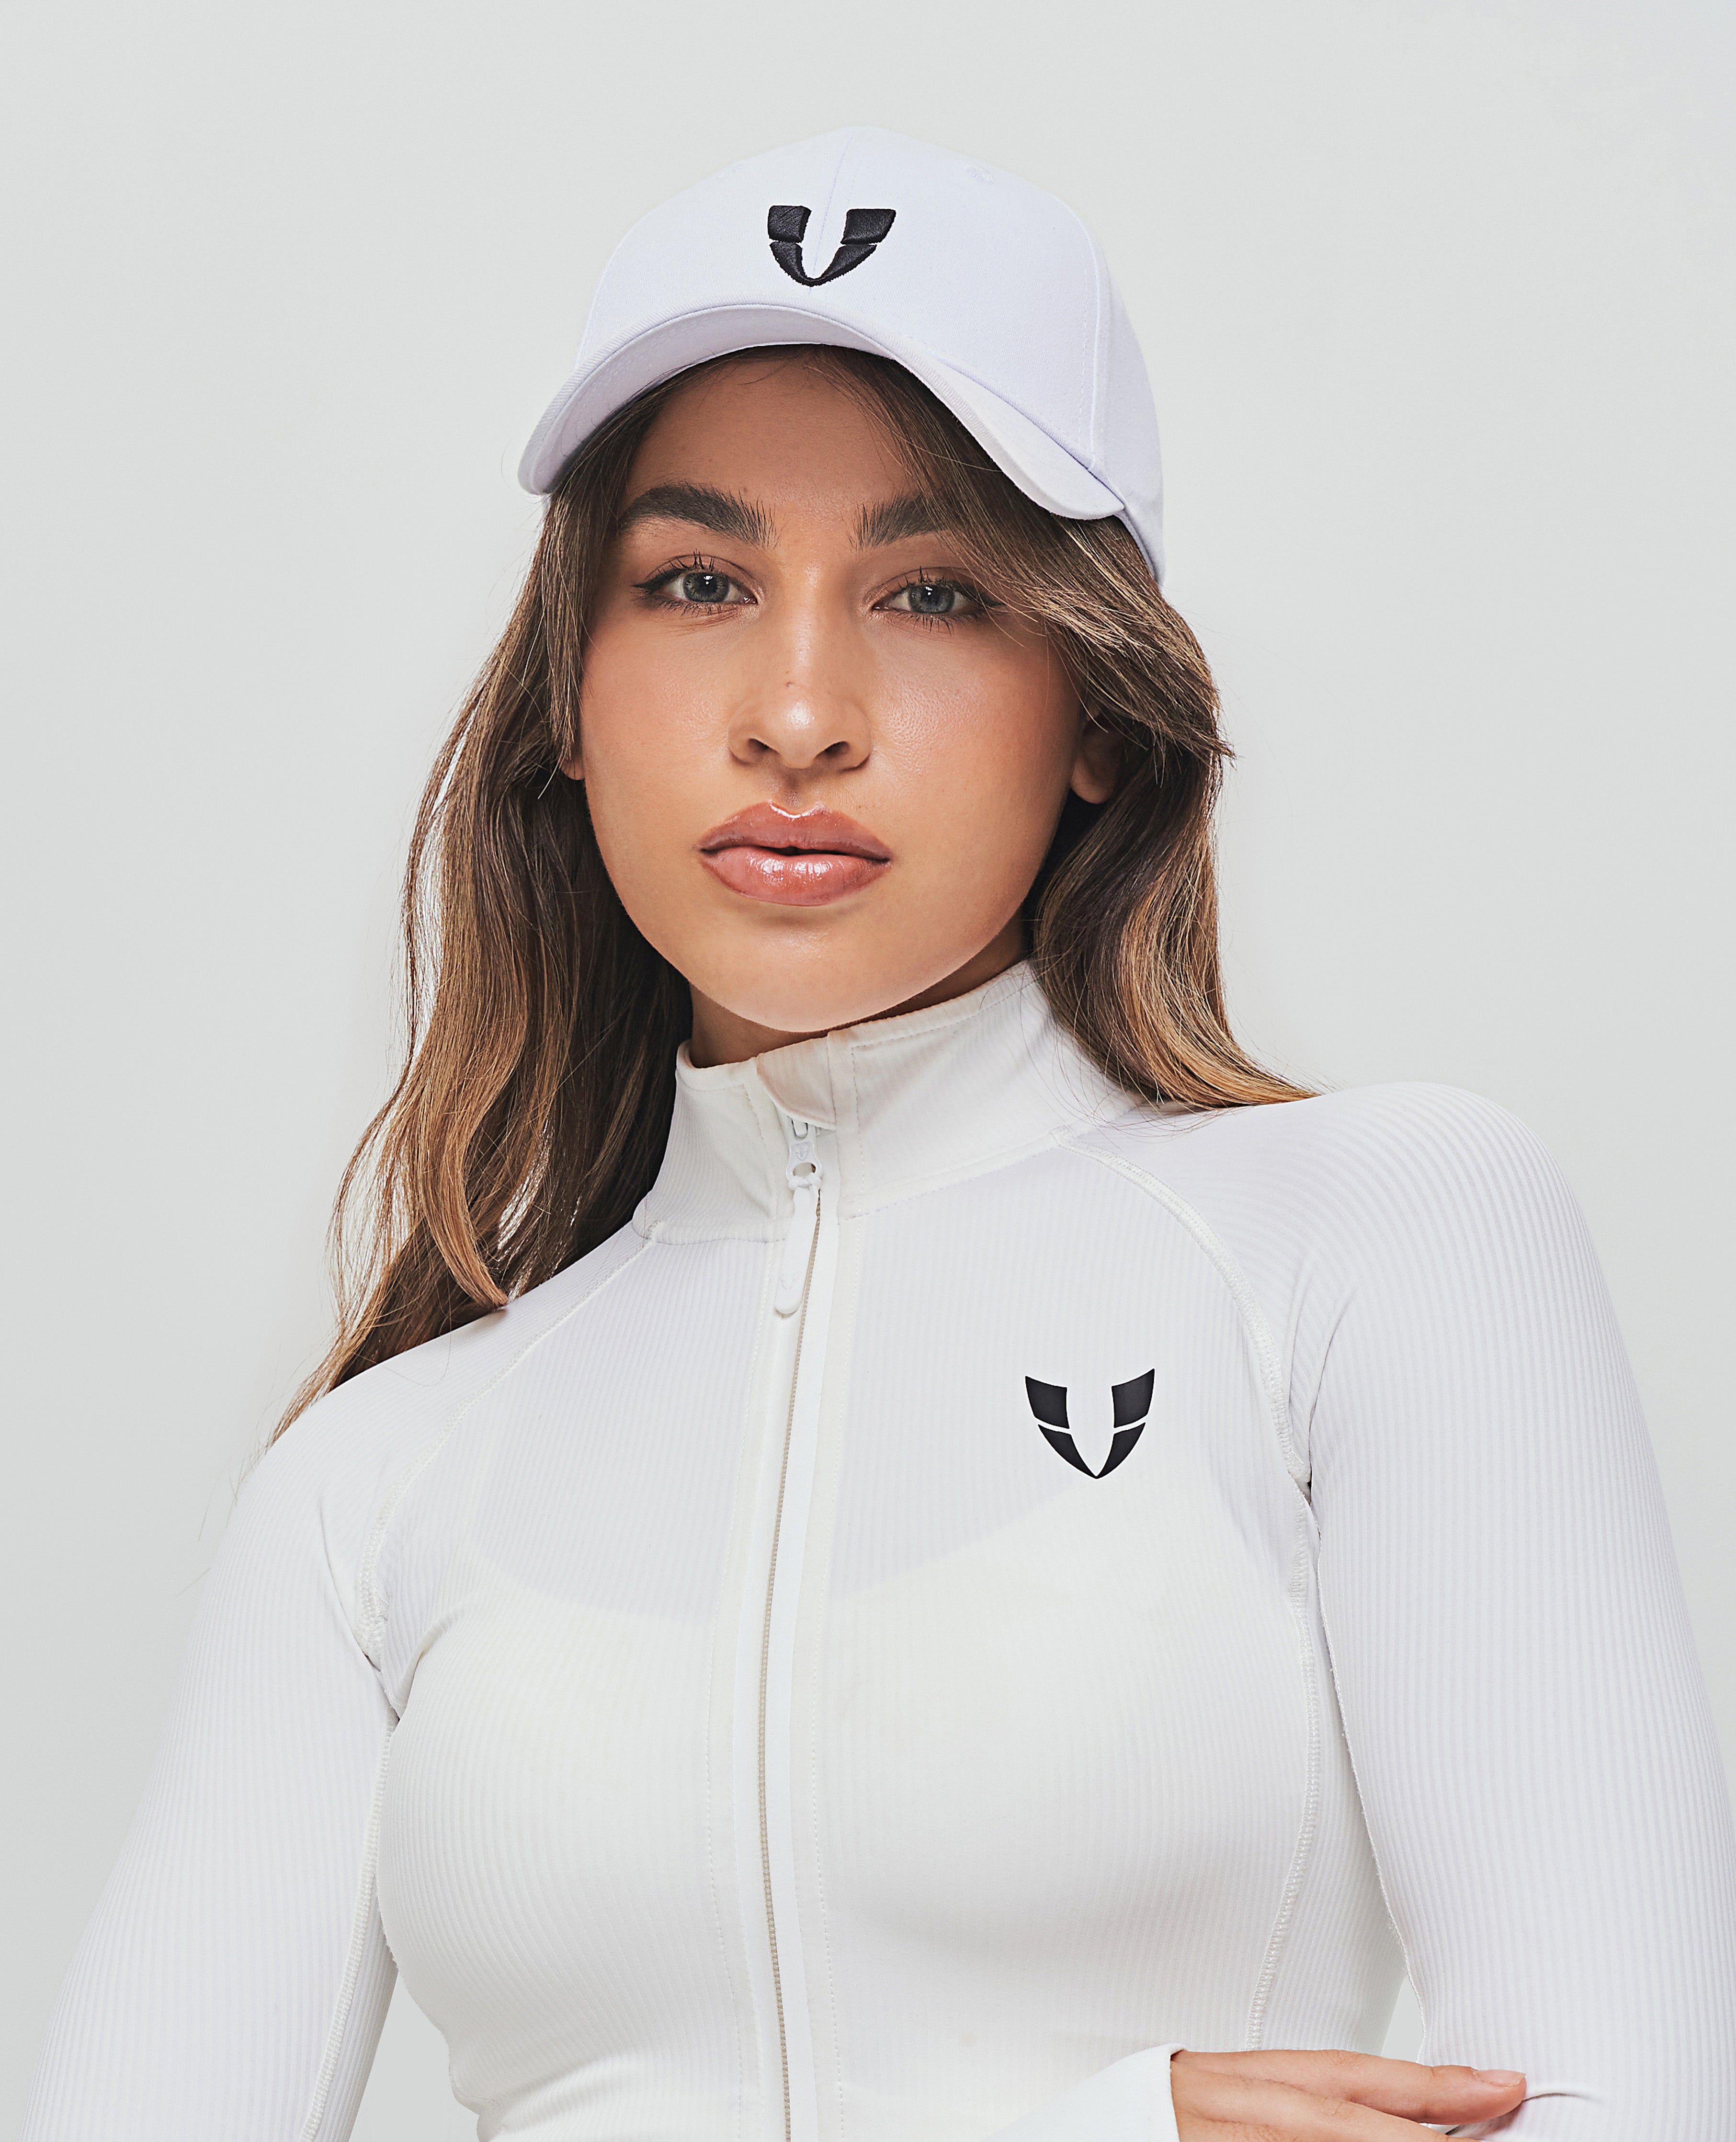 FIRM ABS Adjustable Cap - White